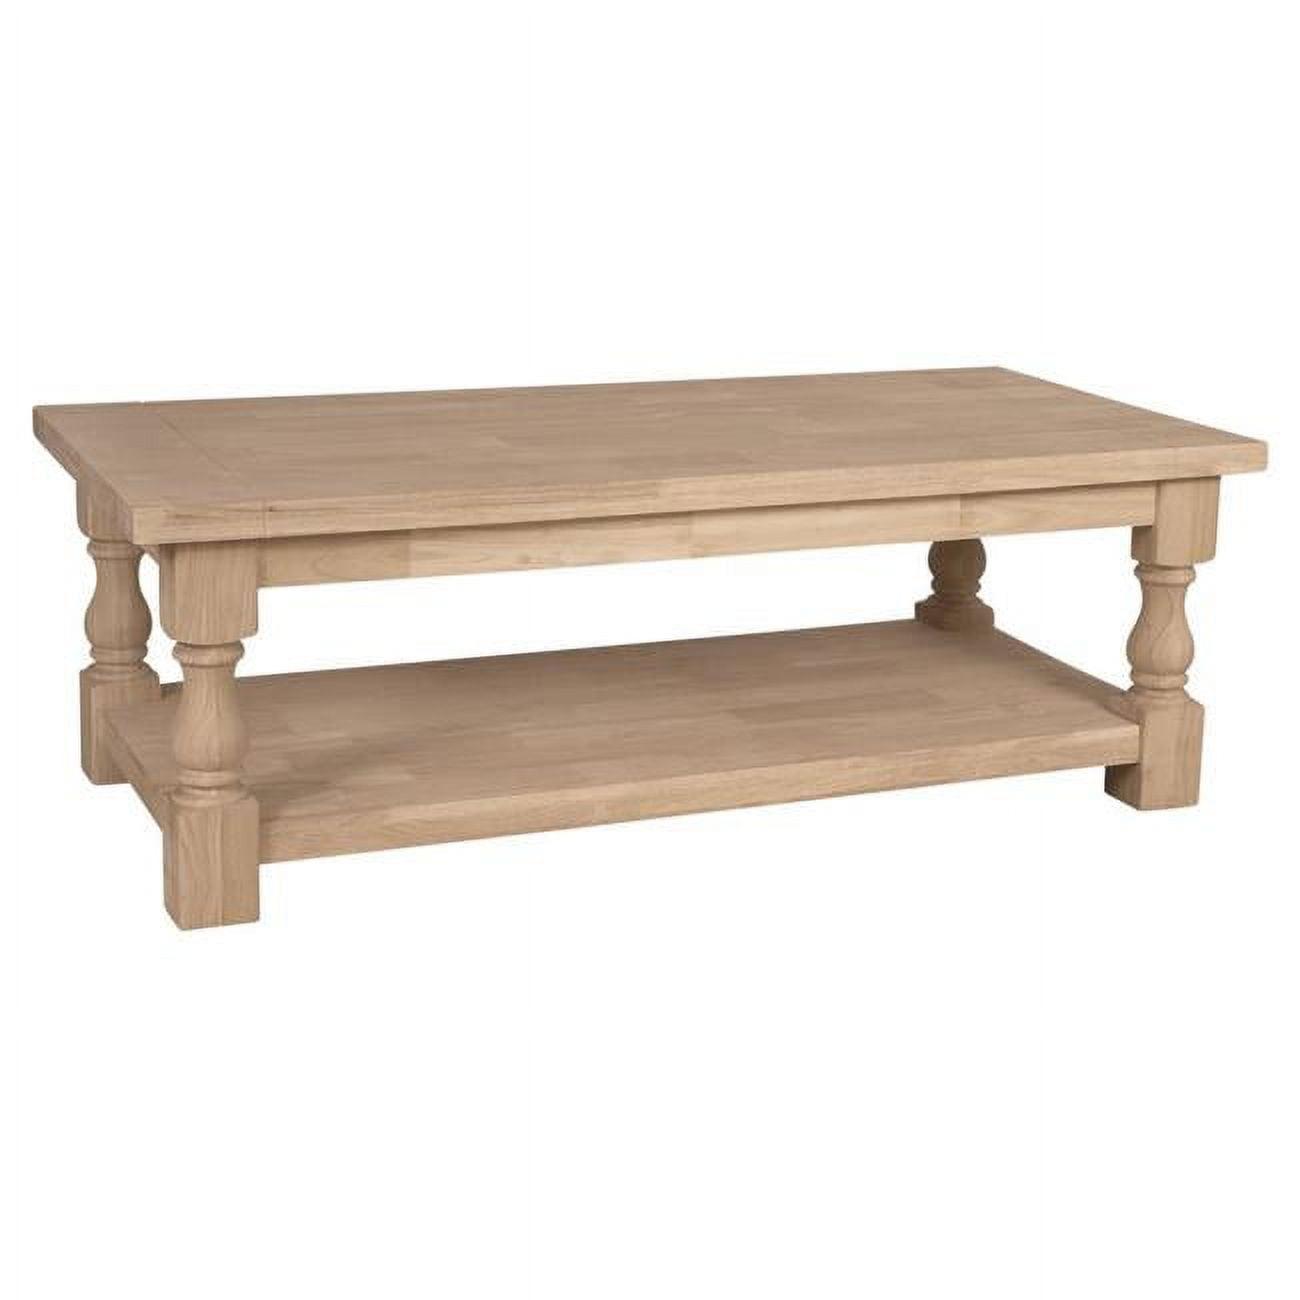 Tuscan Unfinished Solid Parawood Rectangular Coffee Table